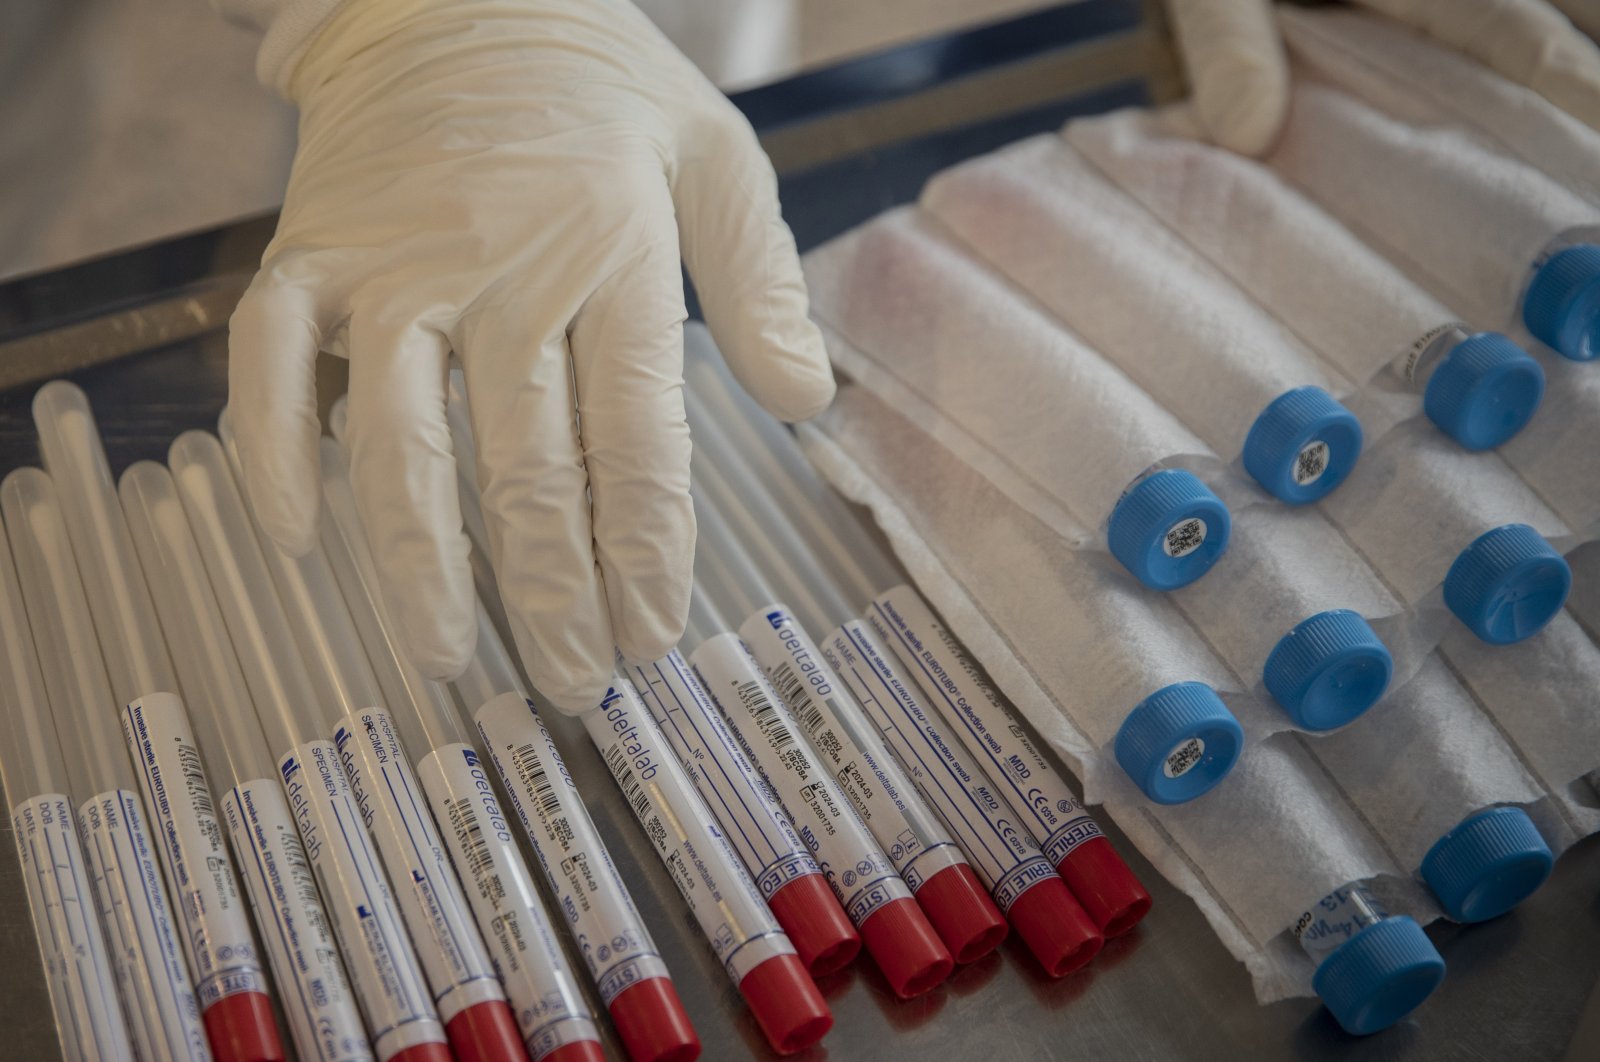 An aid worker from the Spanish NGO Open Arms touches coronavirus detection test kits at a nursing home in Barcelona, Spain on April 1, 2020. (AP Photo)